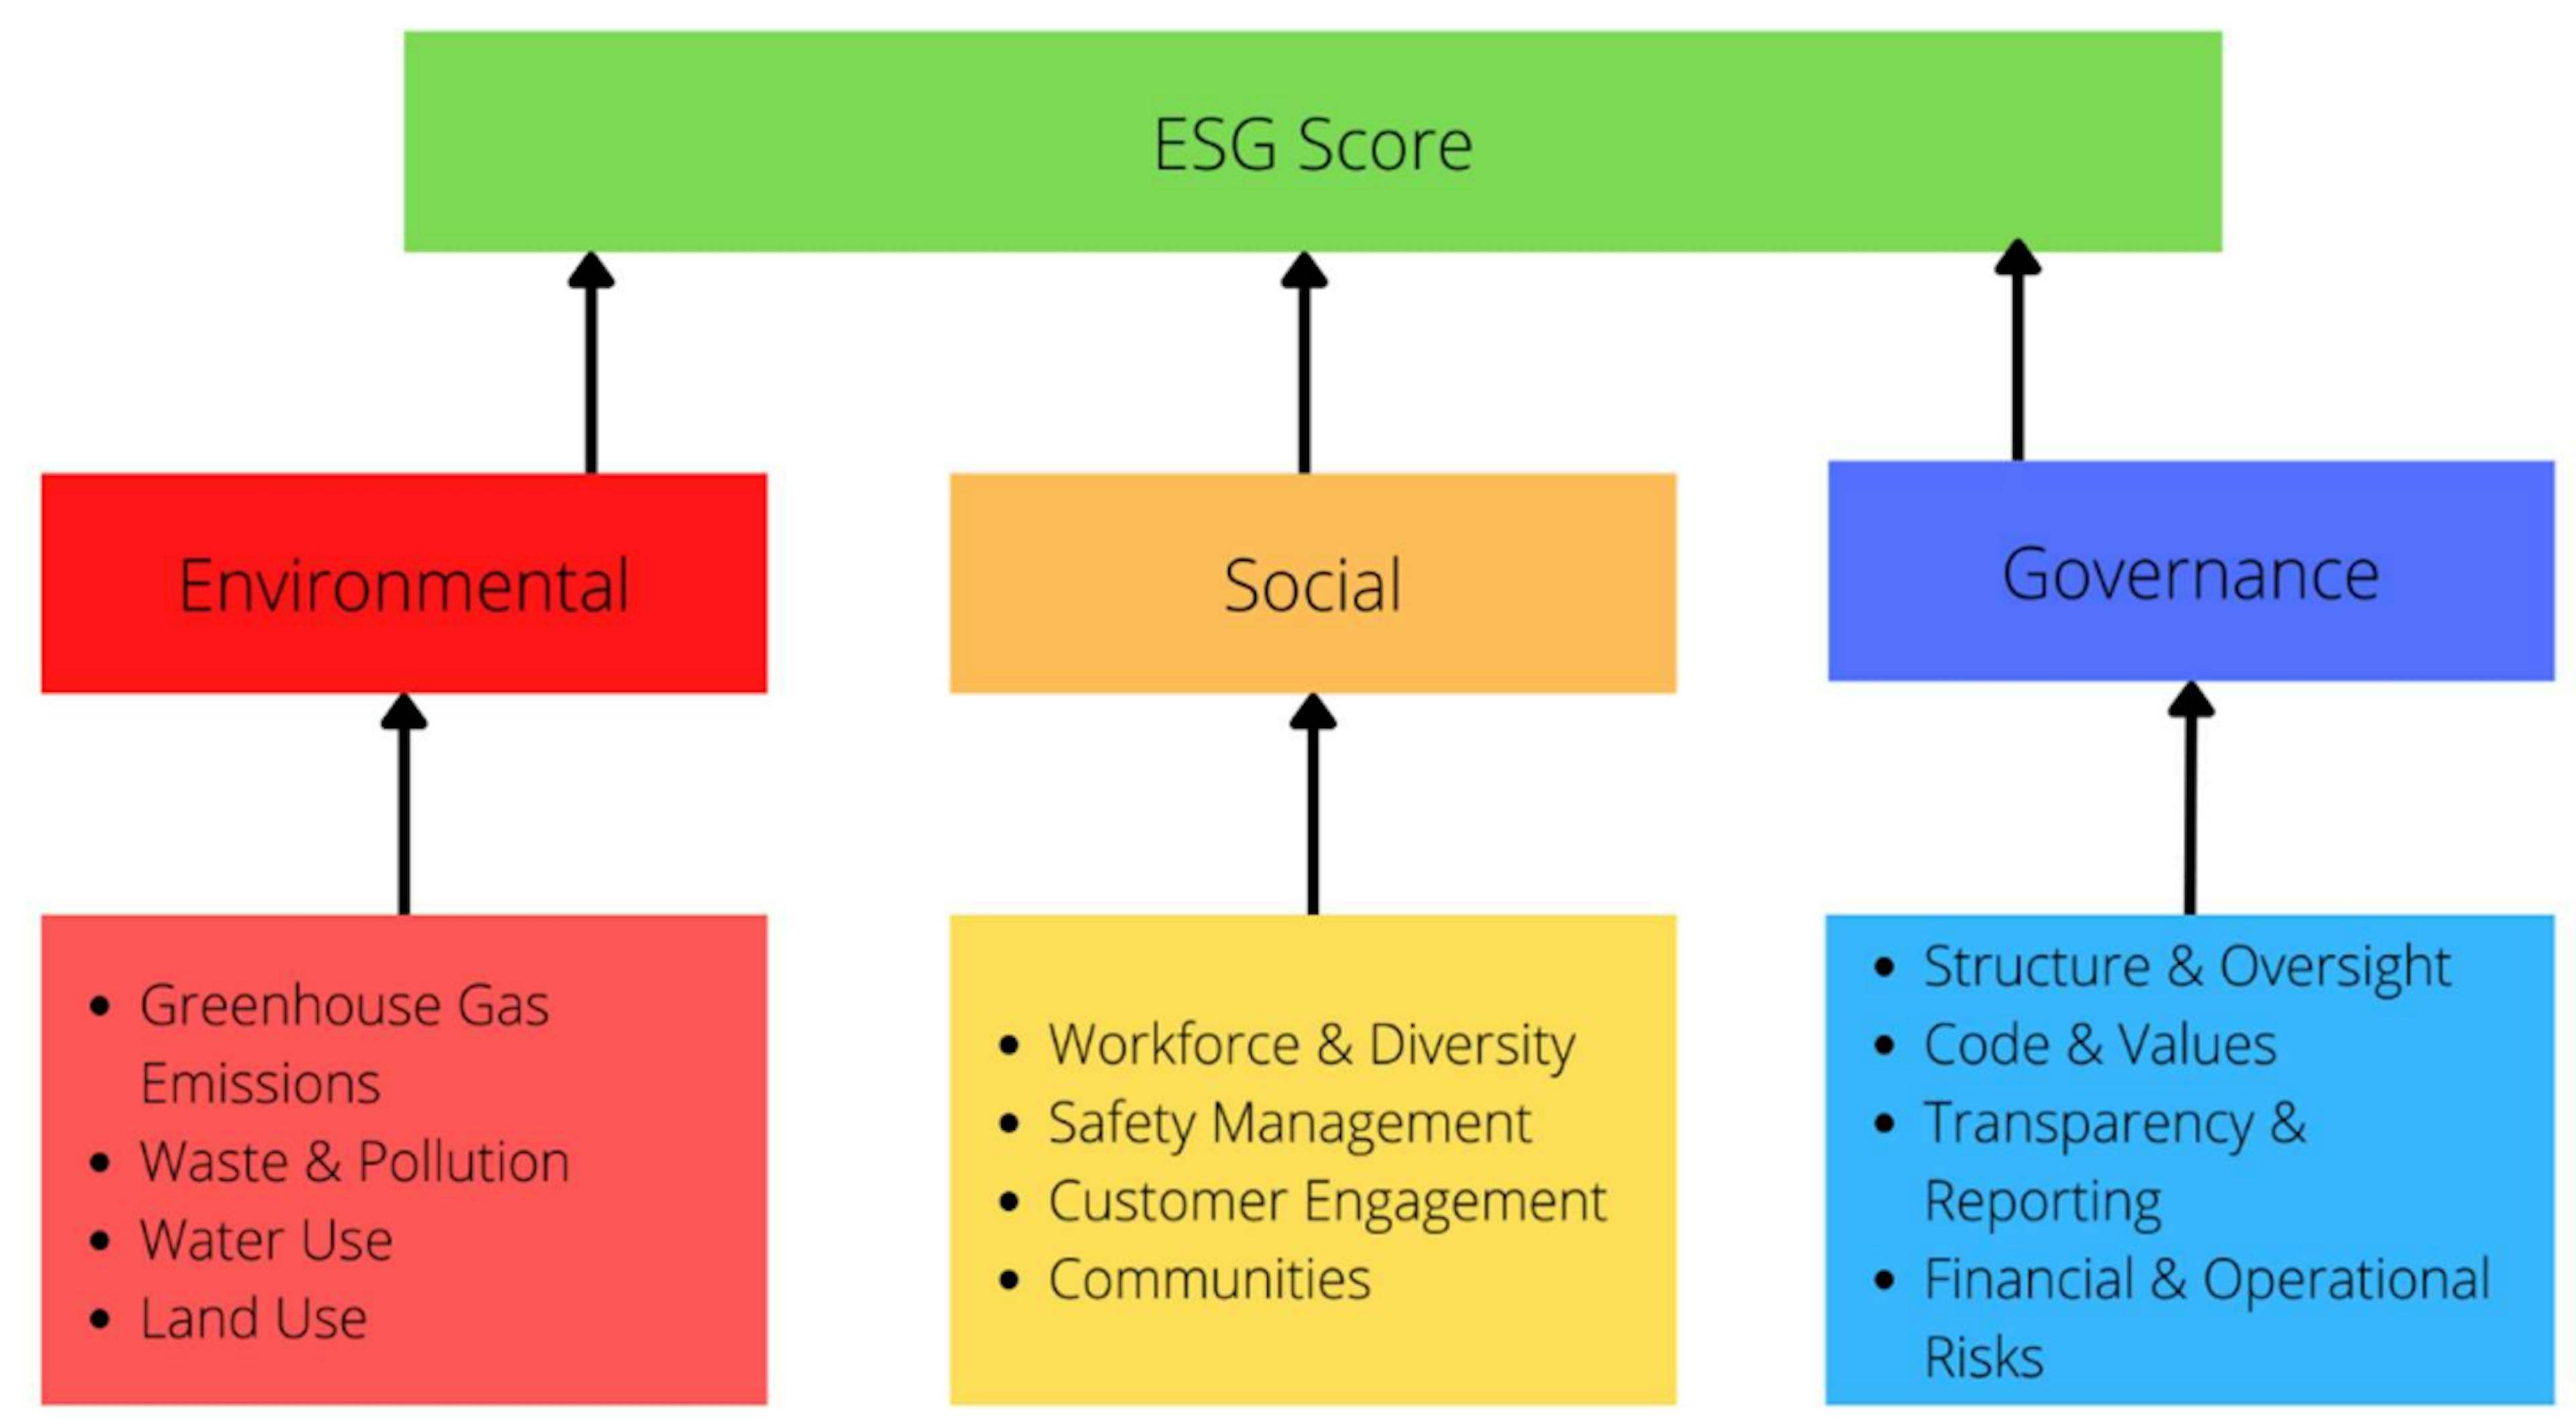 Figure 1: Drawing inspired by S&P Global ESG evaluation framework (S&P Global) 